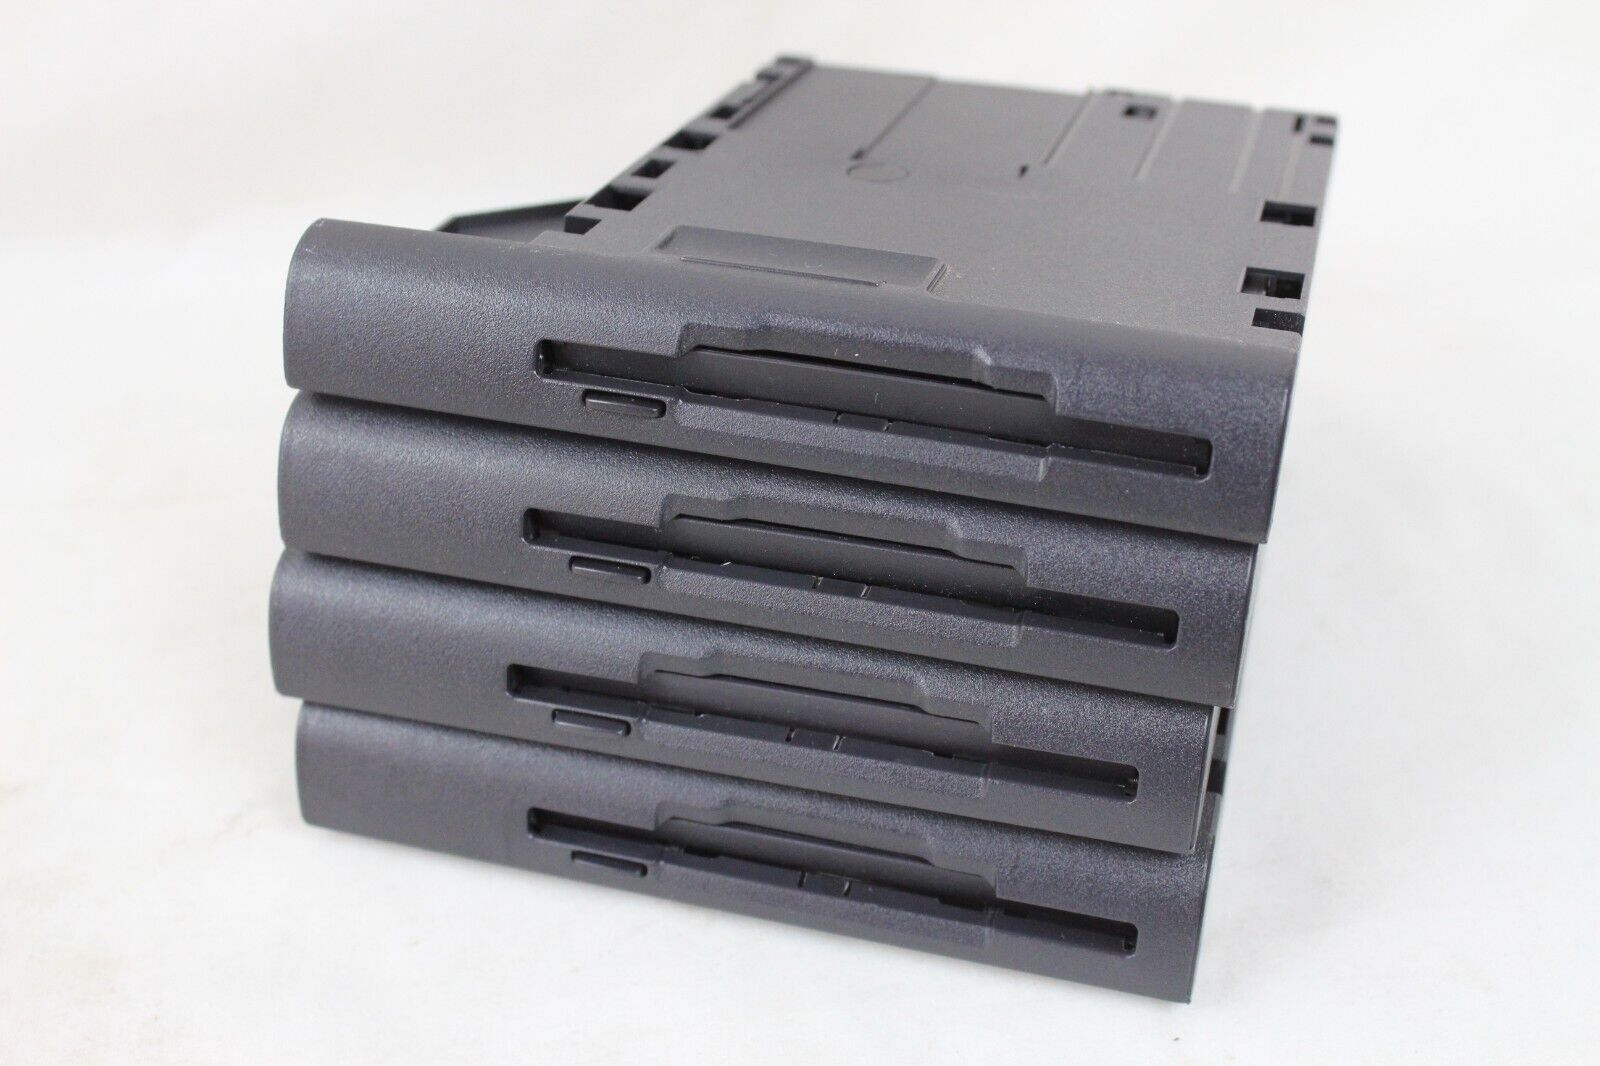 Lot of 4 Dell 4702P Floppy Disk Drive Module Laptop 3.5 Inch Black 1.44 MB 263G